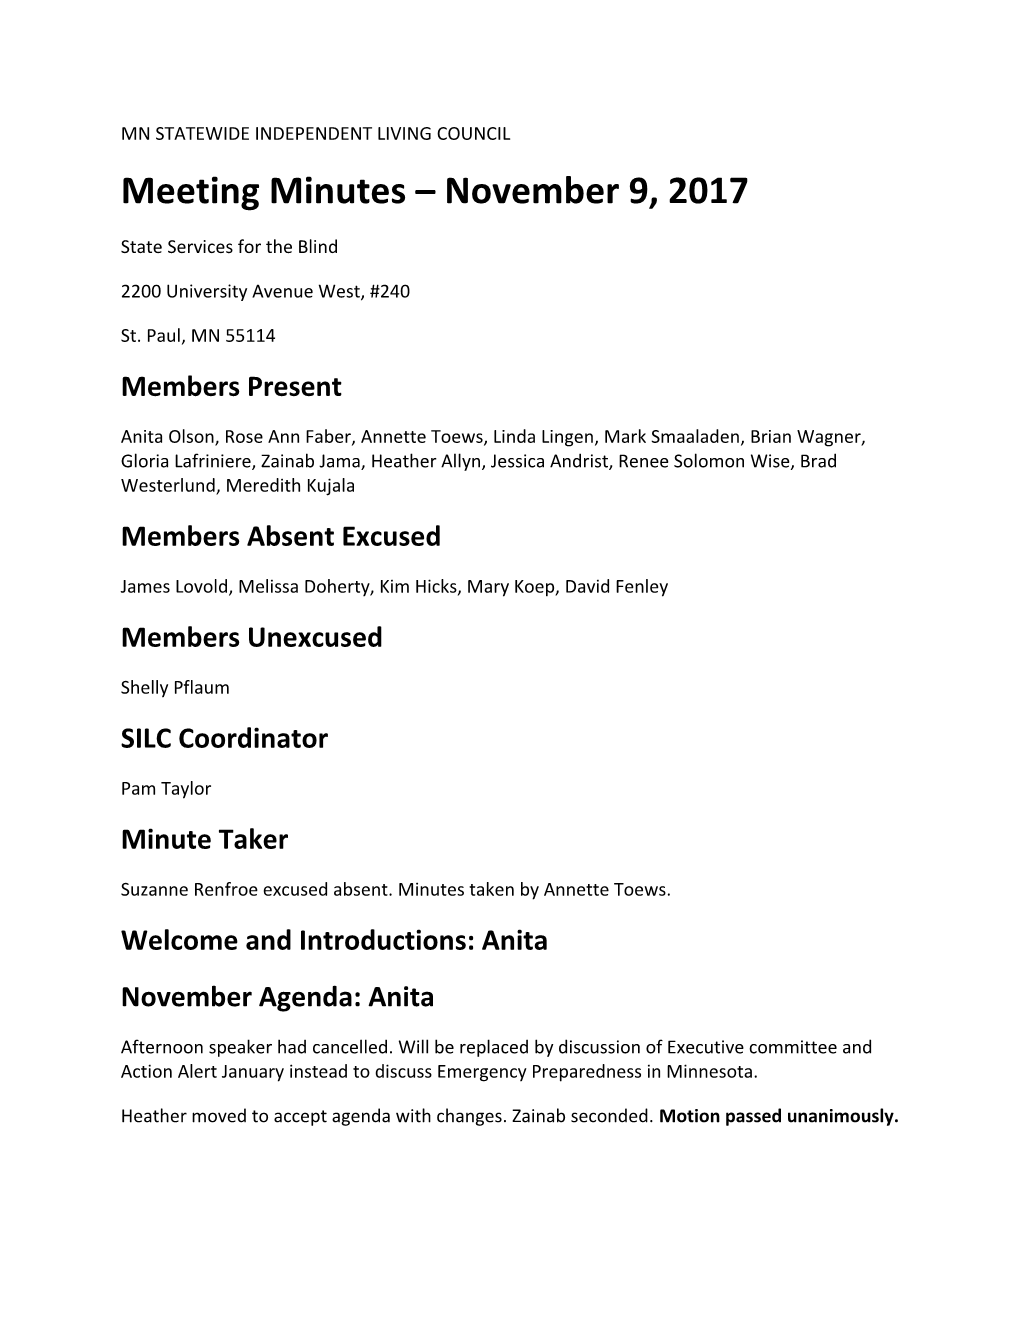 SILC Meeting Minutes for November 9, 2017